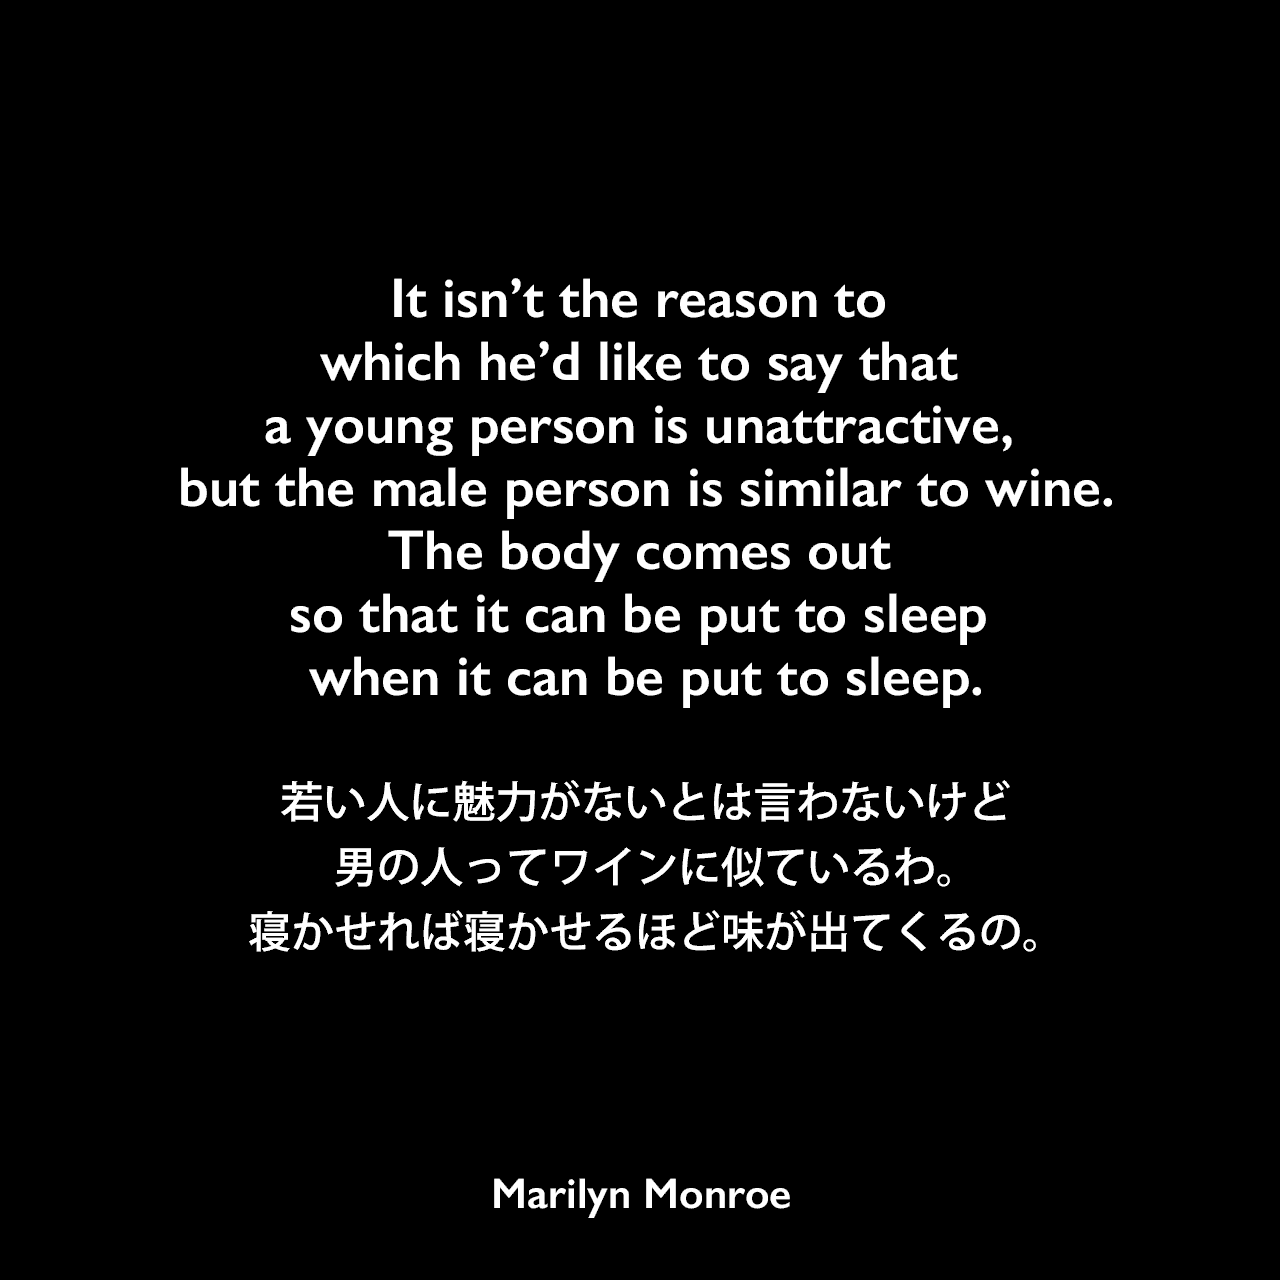 It isn’t the reason to which he’d like to say that a young person is unattractive, but the male person is similar to wine.The body comes out so that it can be put to sleep when it can be put to sleep.若い人に魅力がないとは言わないけど、男の人ってワインに似ているわ。寝かせれば寝かせるほど味が出てくるの。Marilyn Monroe